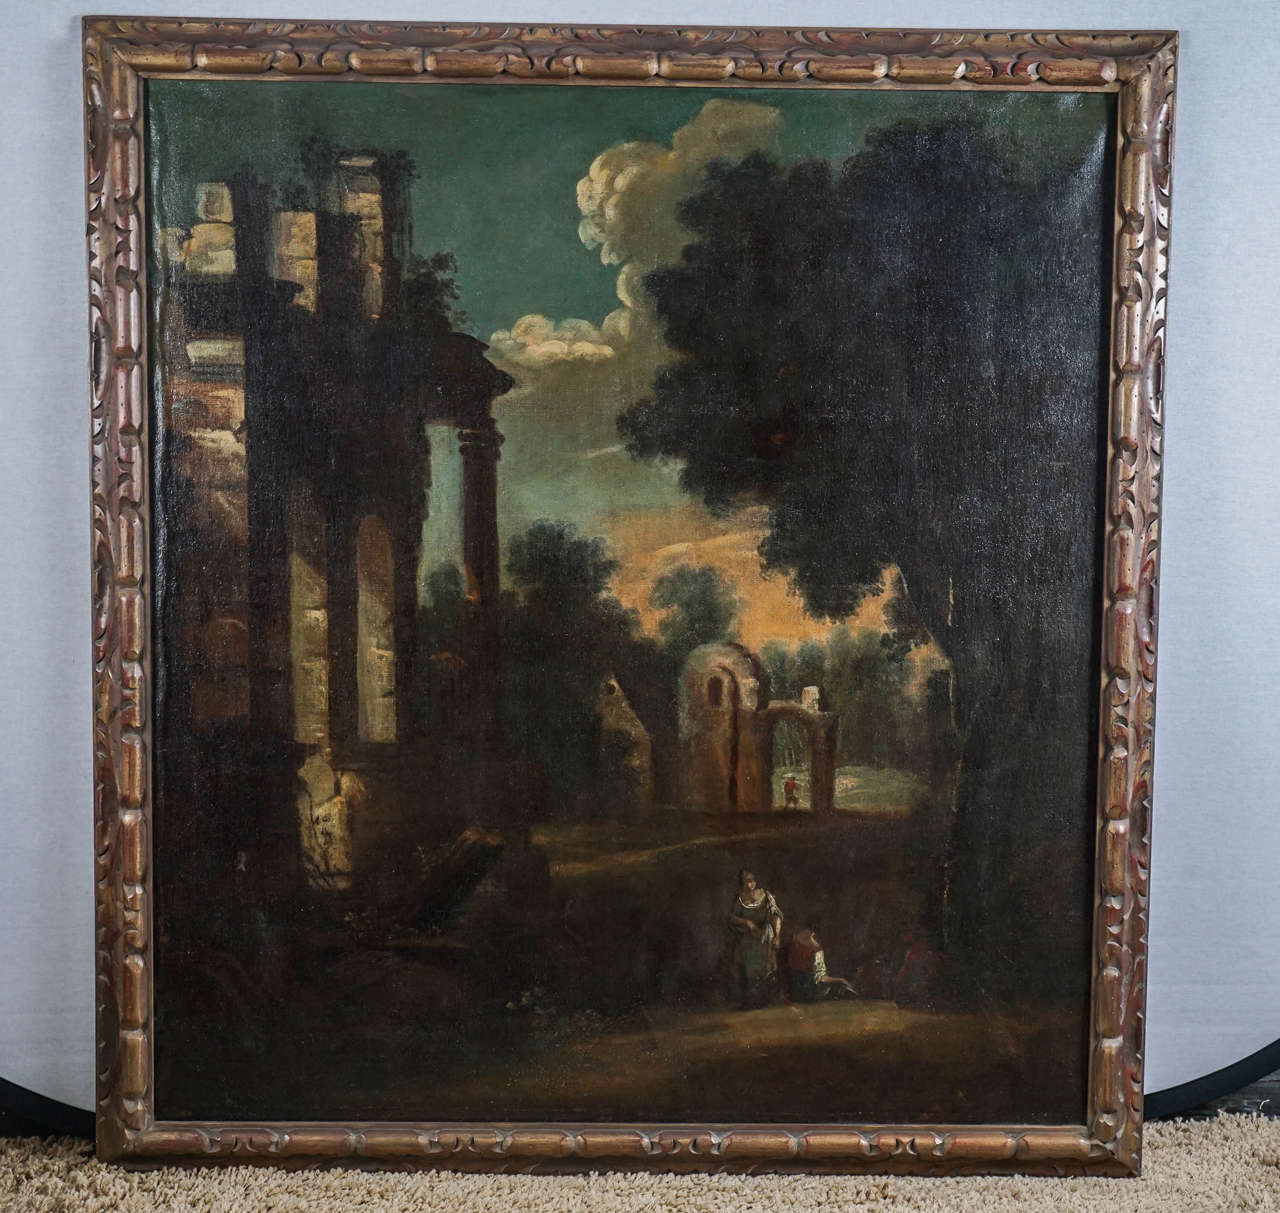 Rare as a pair of left and right works that survive together this pair of paintings are Italian. Romantic and bucolic with ruins and peasants at work amongst the remains of Rome's great past. Created as work to feed the ever-growing desire of